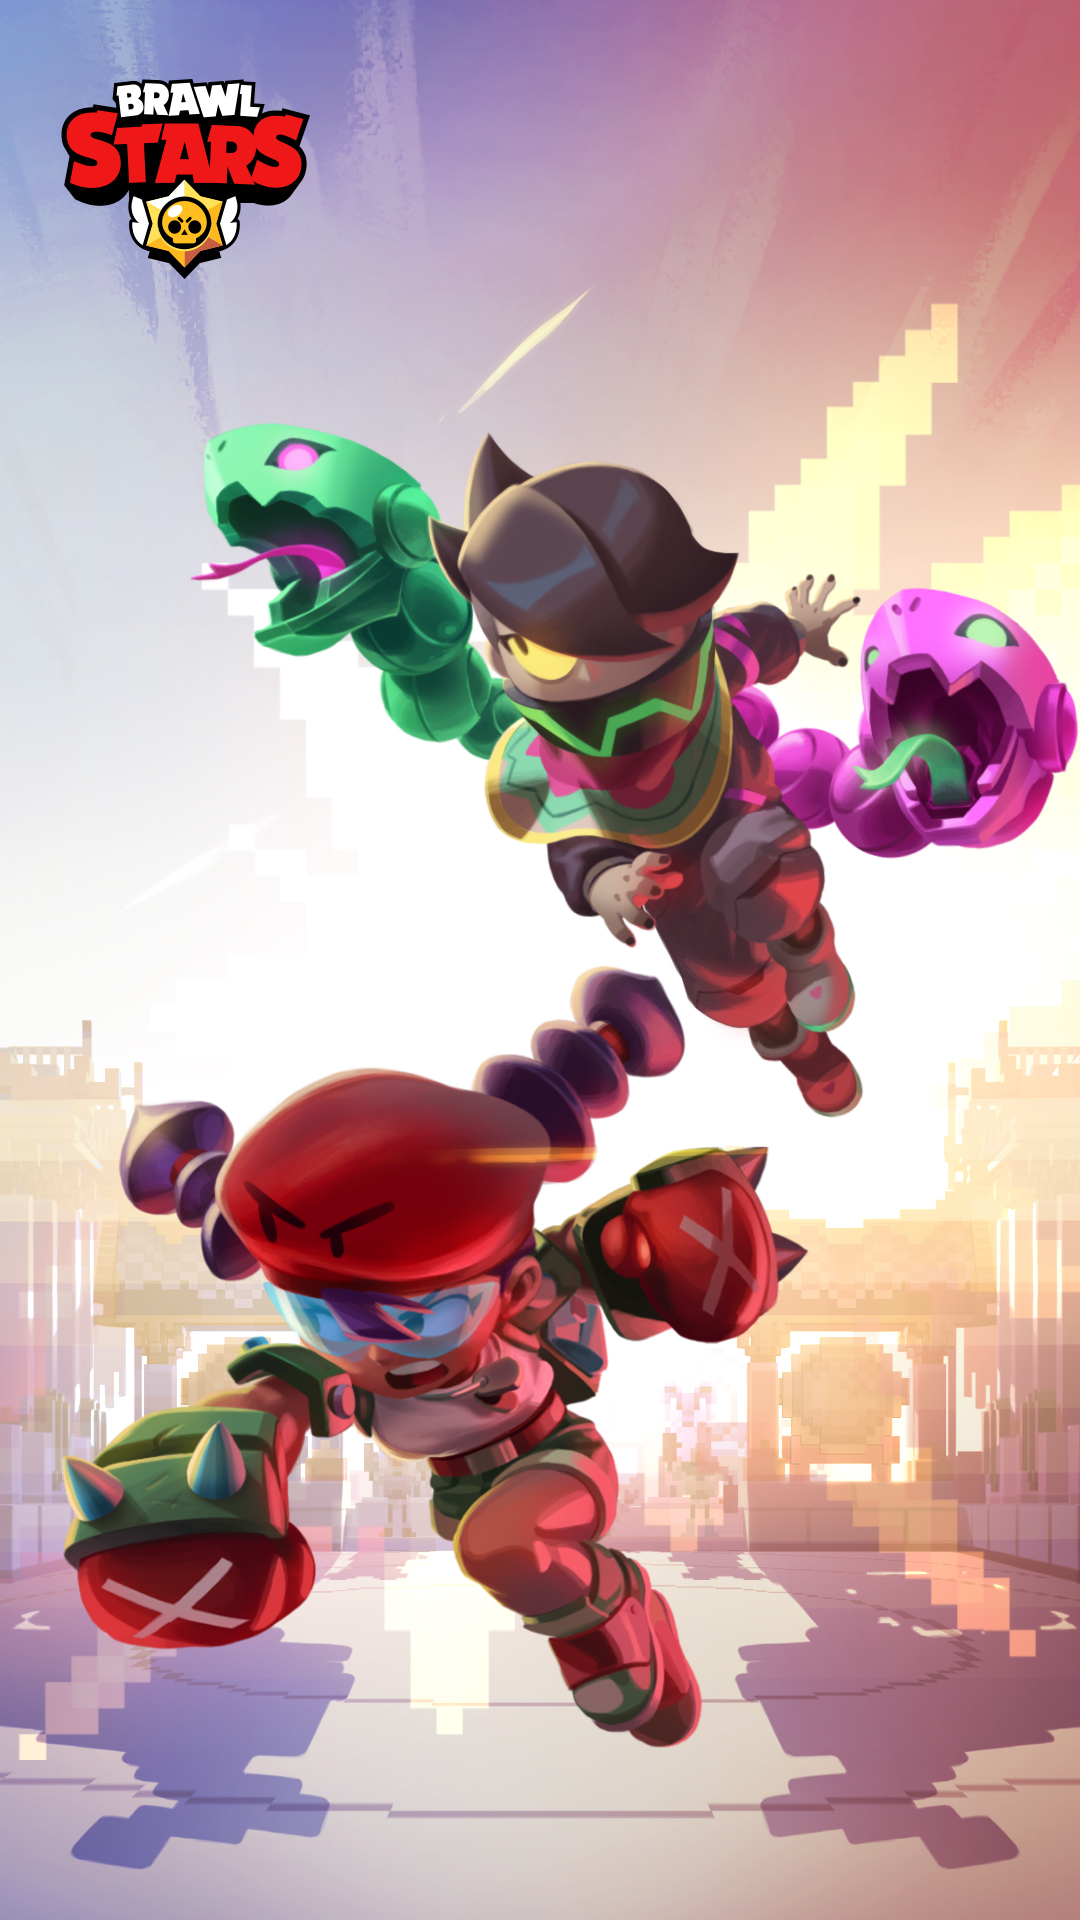 Brawl Stars of course, some more wallpaper for your phone! ✨